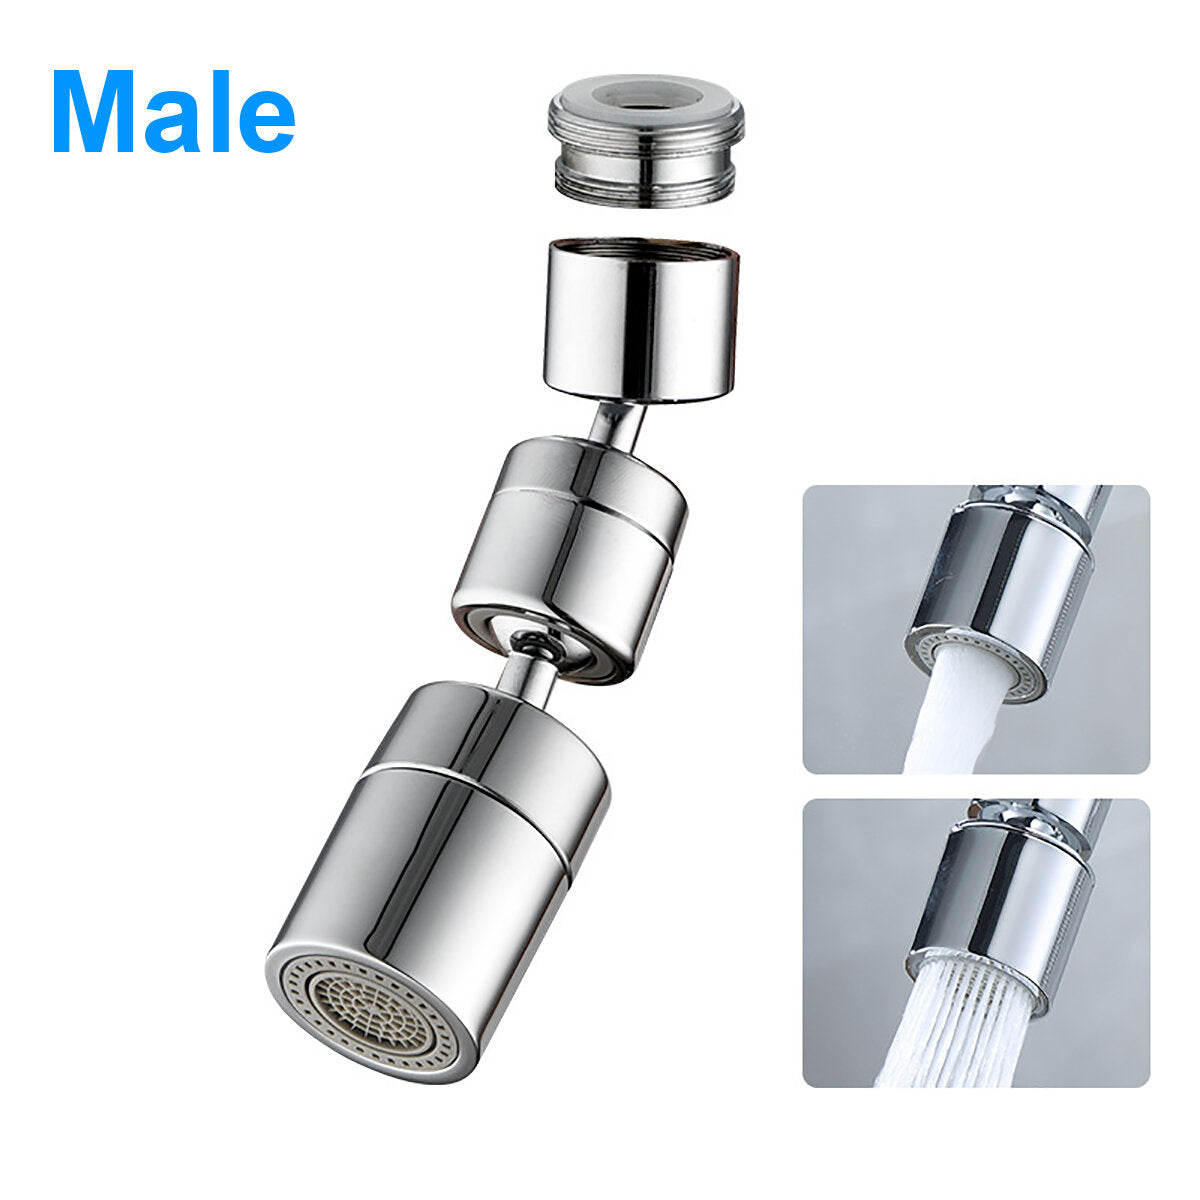 Sink Faucet Aerator 1080 Degree Swivel Universal Splash Filter Faucets Extender Bubbler Attachment For Eye Flush Face Wash And Gargle